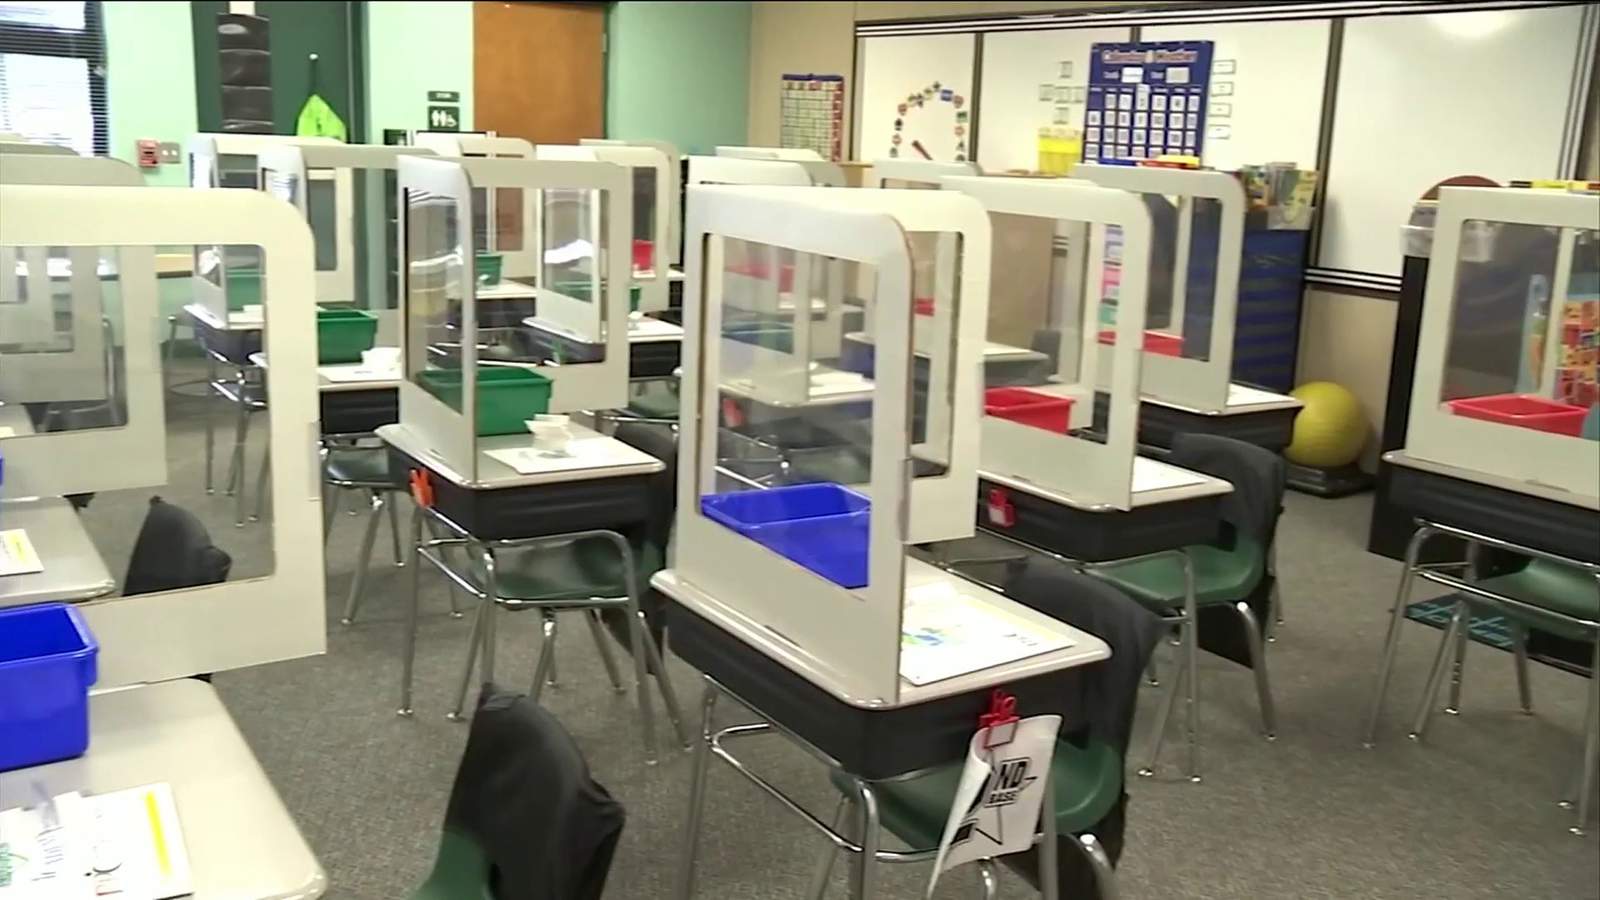 St. Johns County schools spent $2.4 million on COVID-19 safety measures